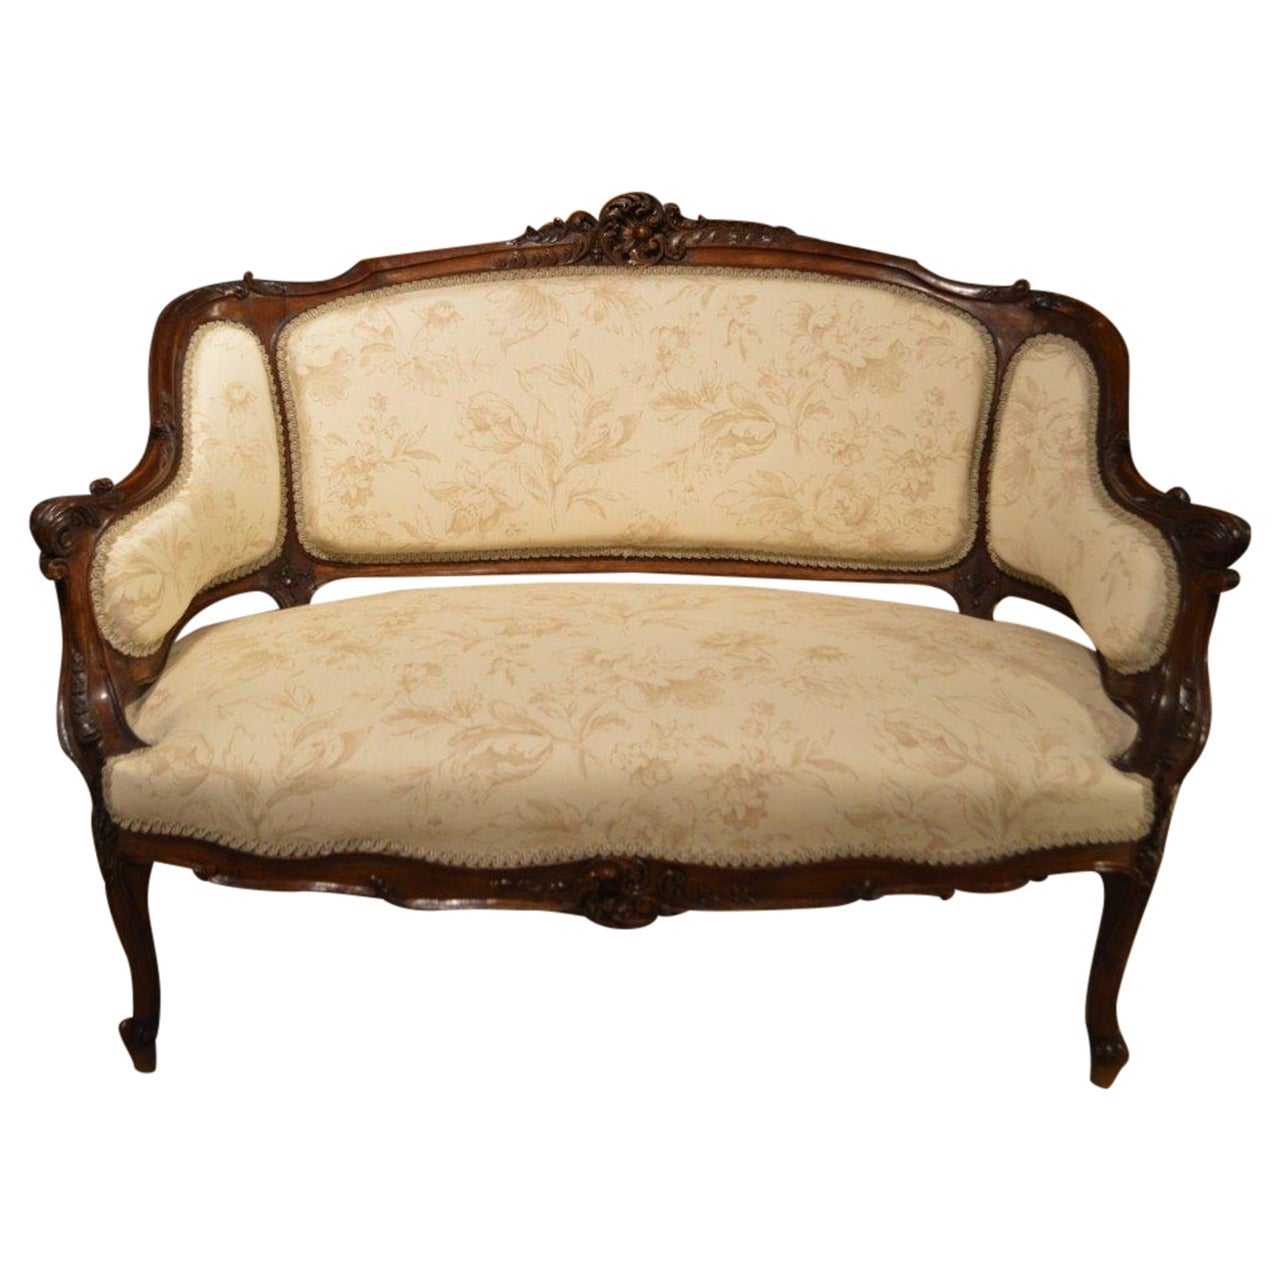 French Finely Carved 19th Century Walnut Antique Settee or Canapé